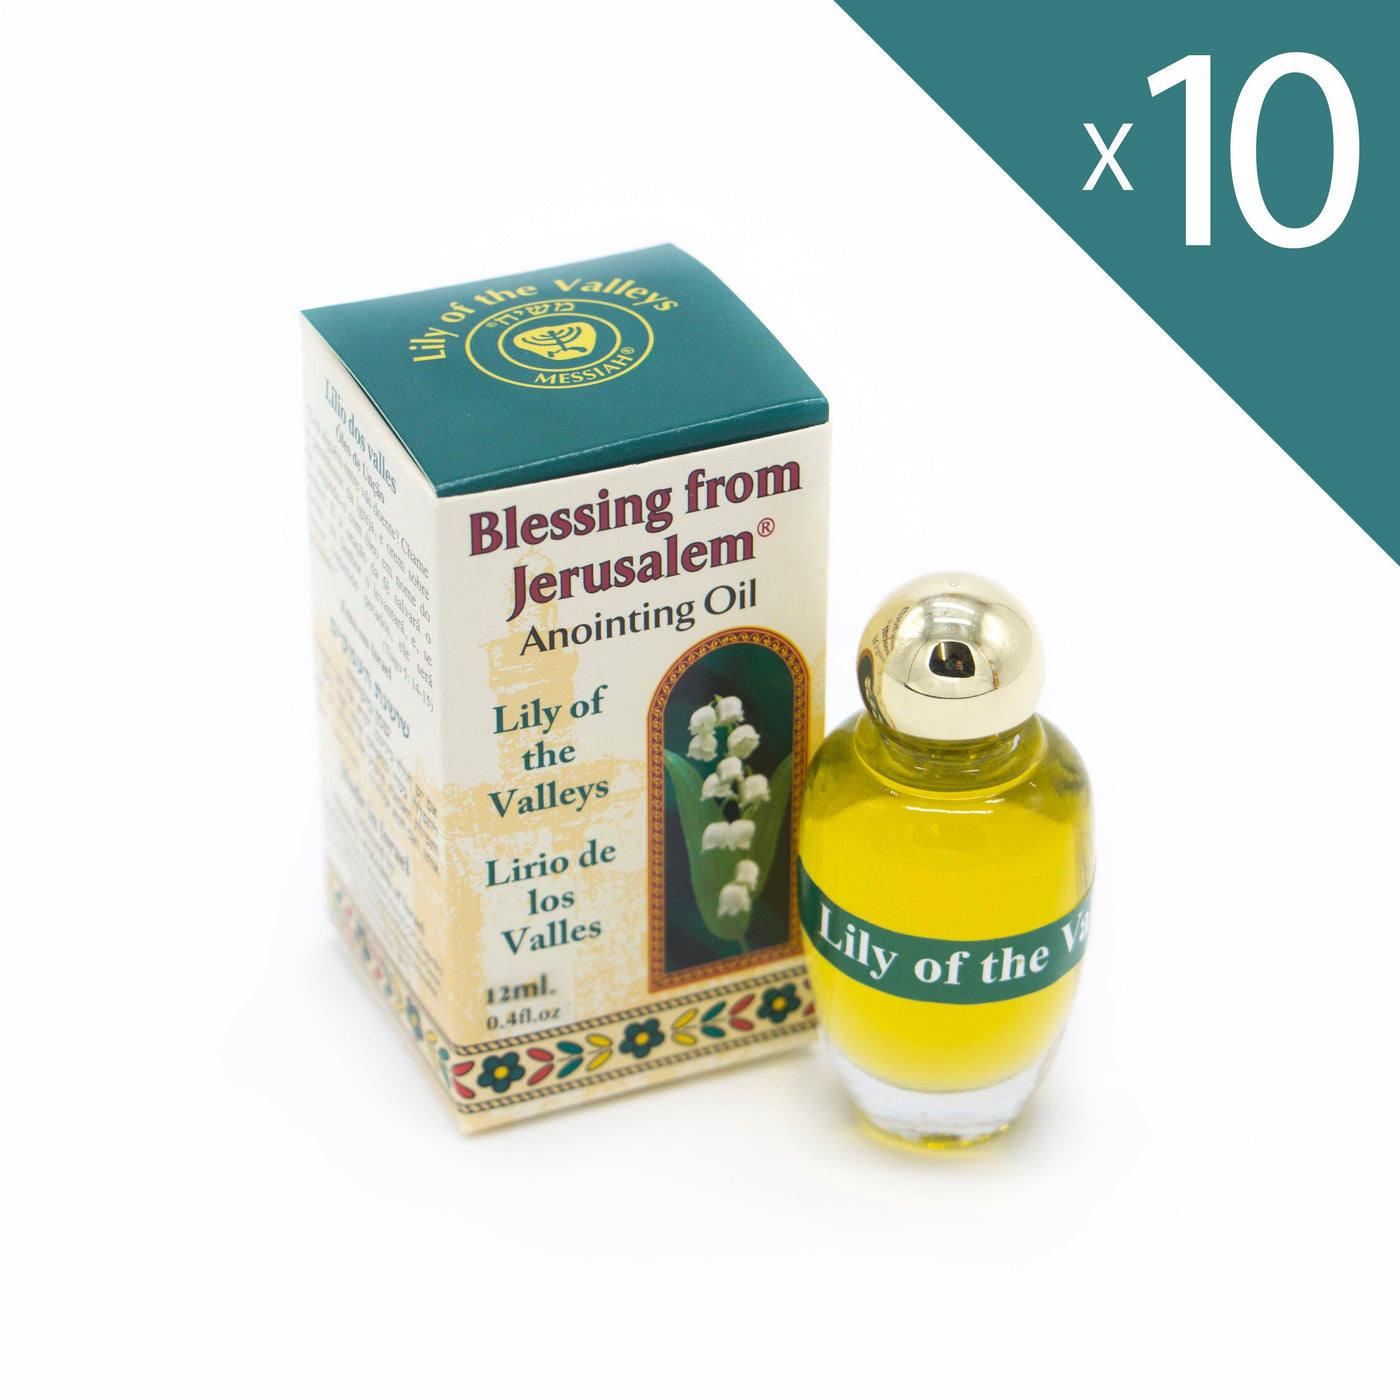 Lot of 10 x Anointing Oil Lily Of The Valleys 12ml - 0.4oz From Holyland (10 bottles) - Spring Nahal